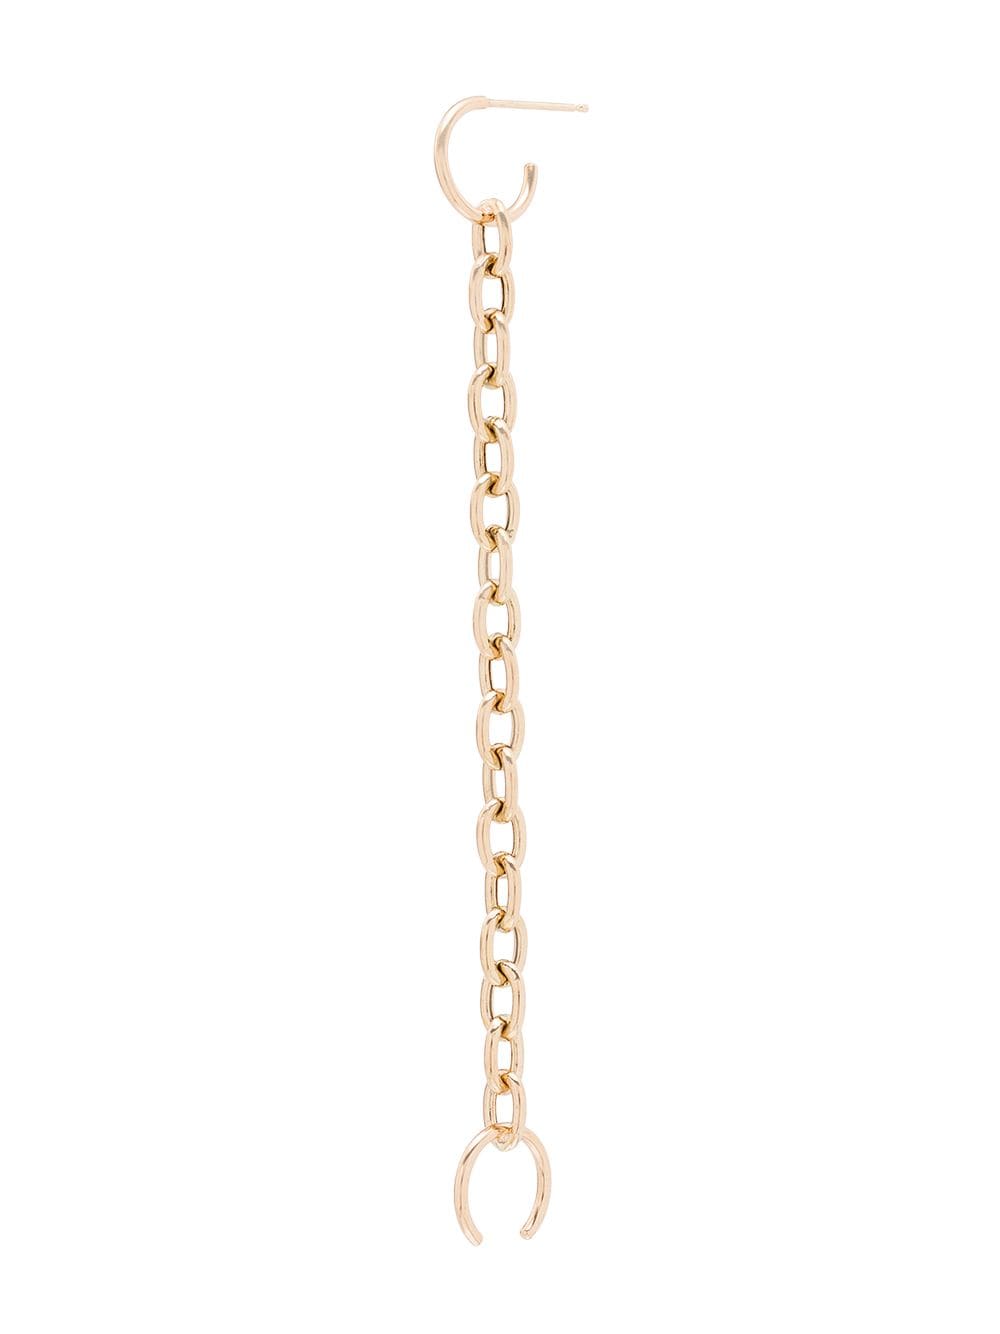 Image 1 of Zoë Chicco 14kt gold chain earcuff